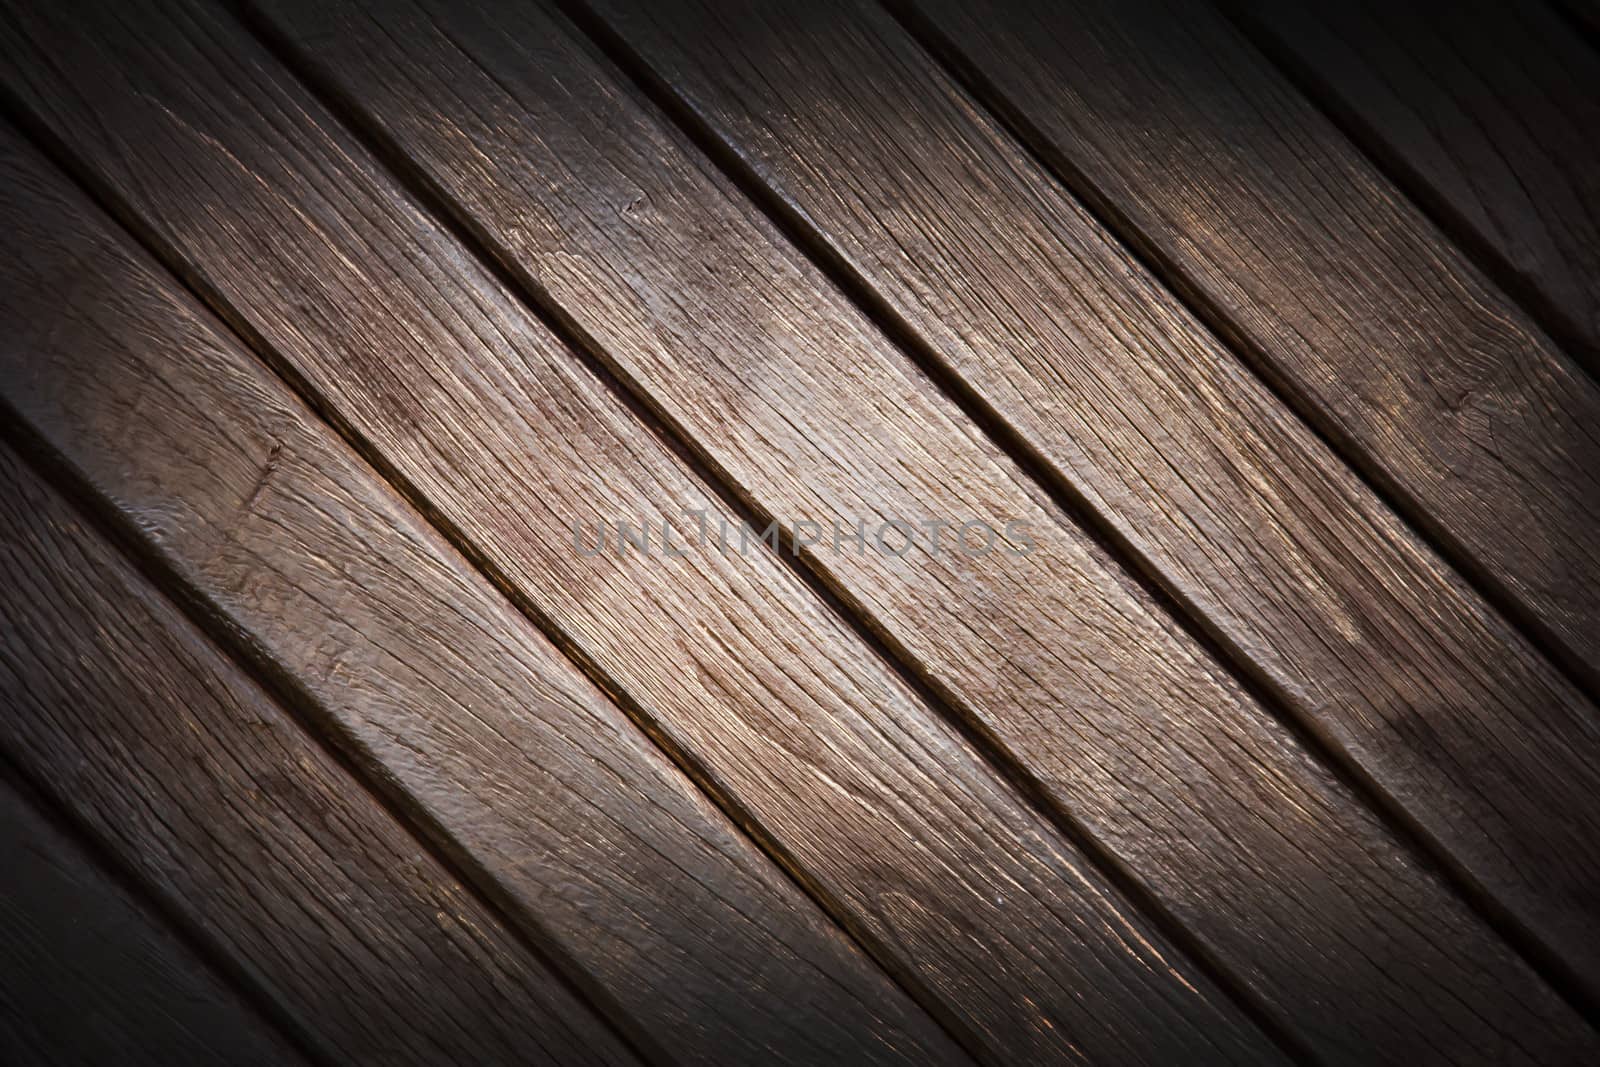 Wood texture by marco_govel